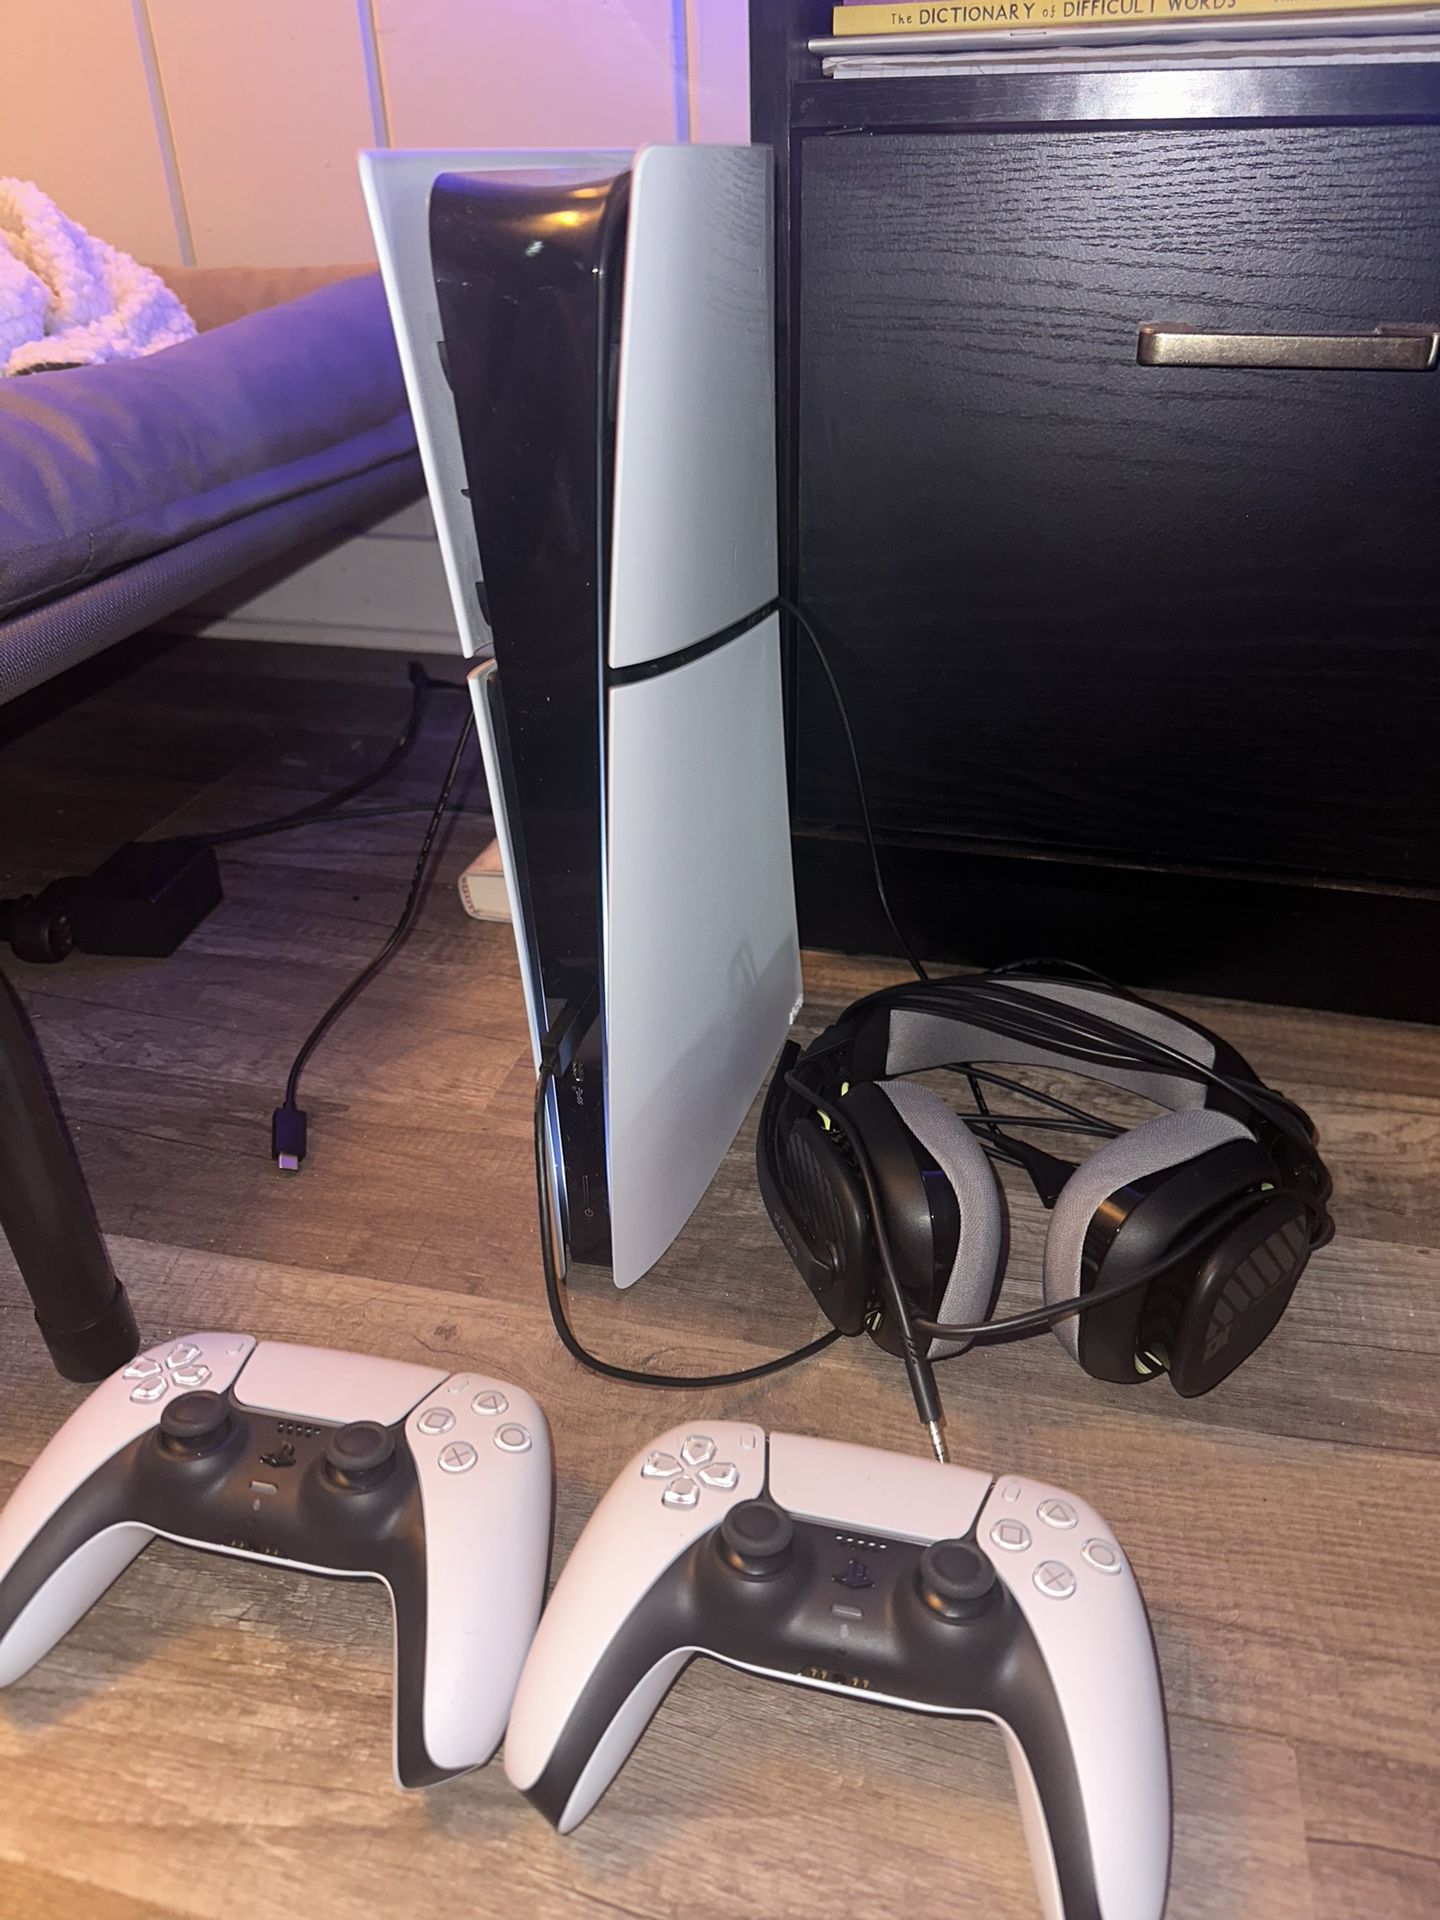 Ps5 Brand new 2 Controllers And Headset 